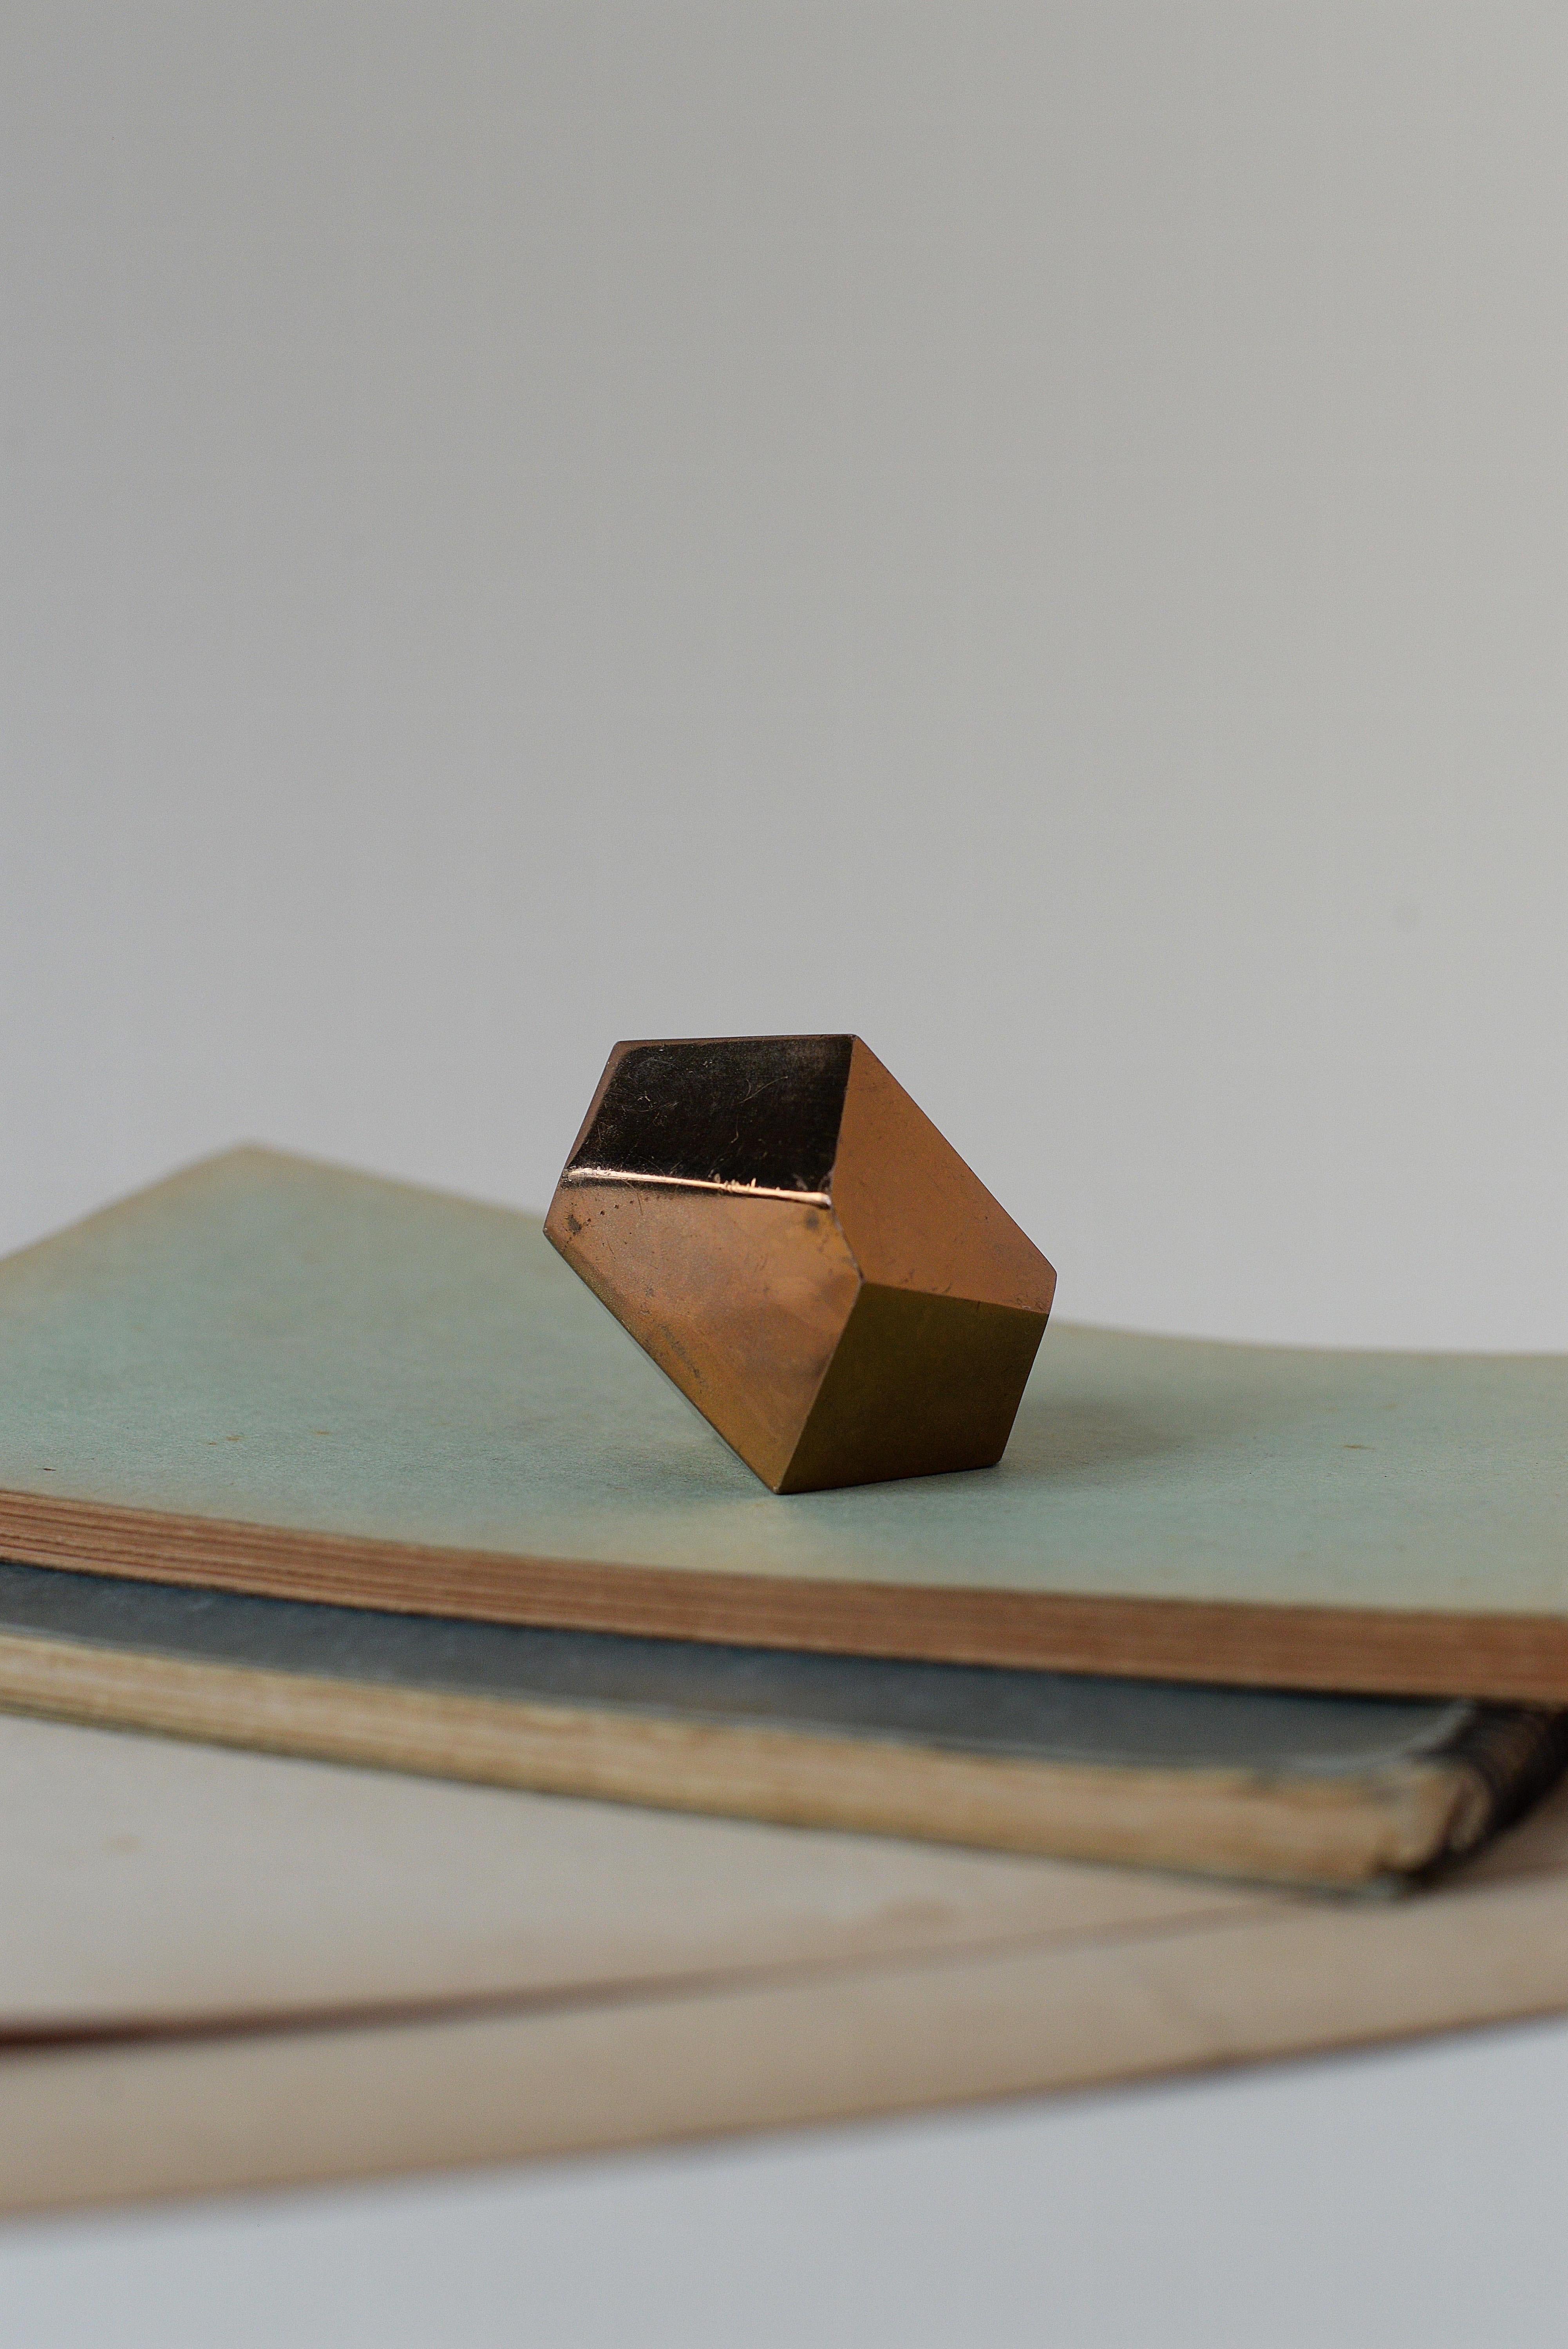 Brutalist Bronze Geometric Paperweight, Brass-Plated, 1980s For Sale